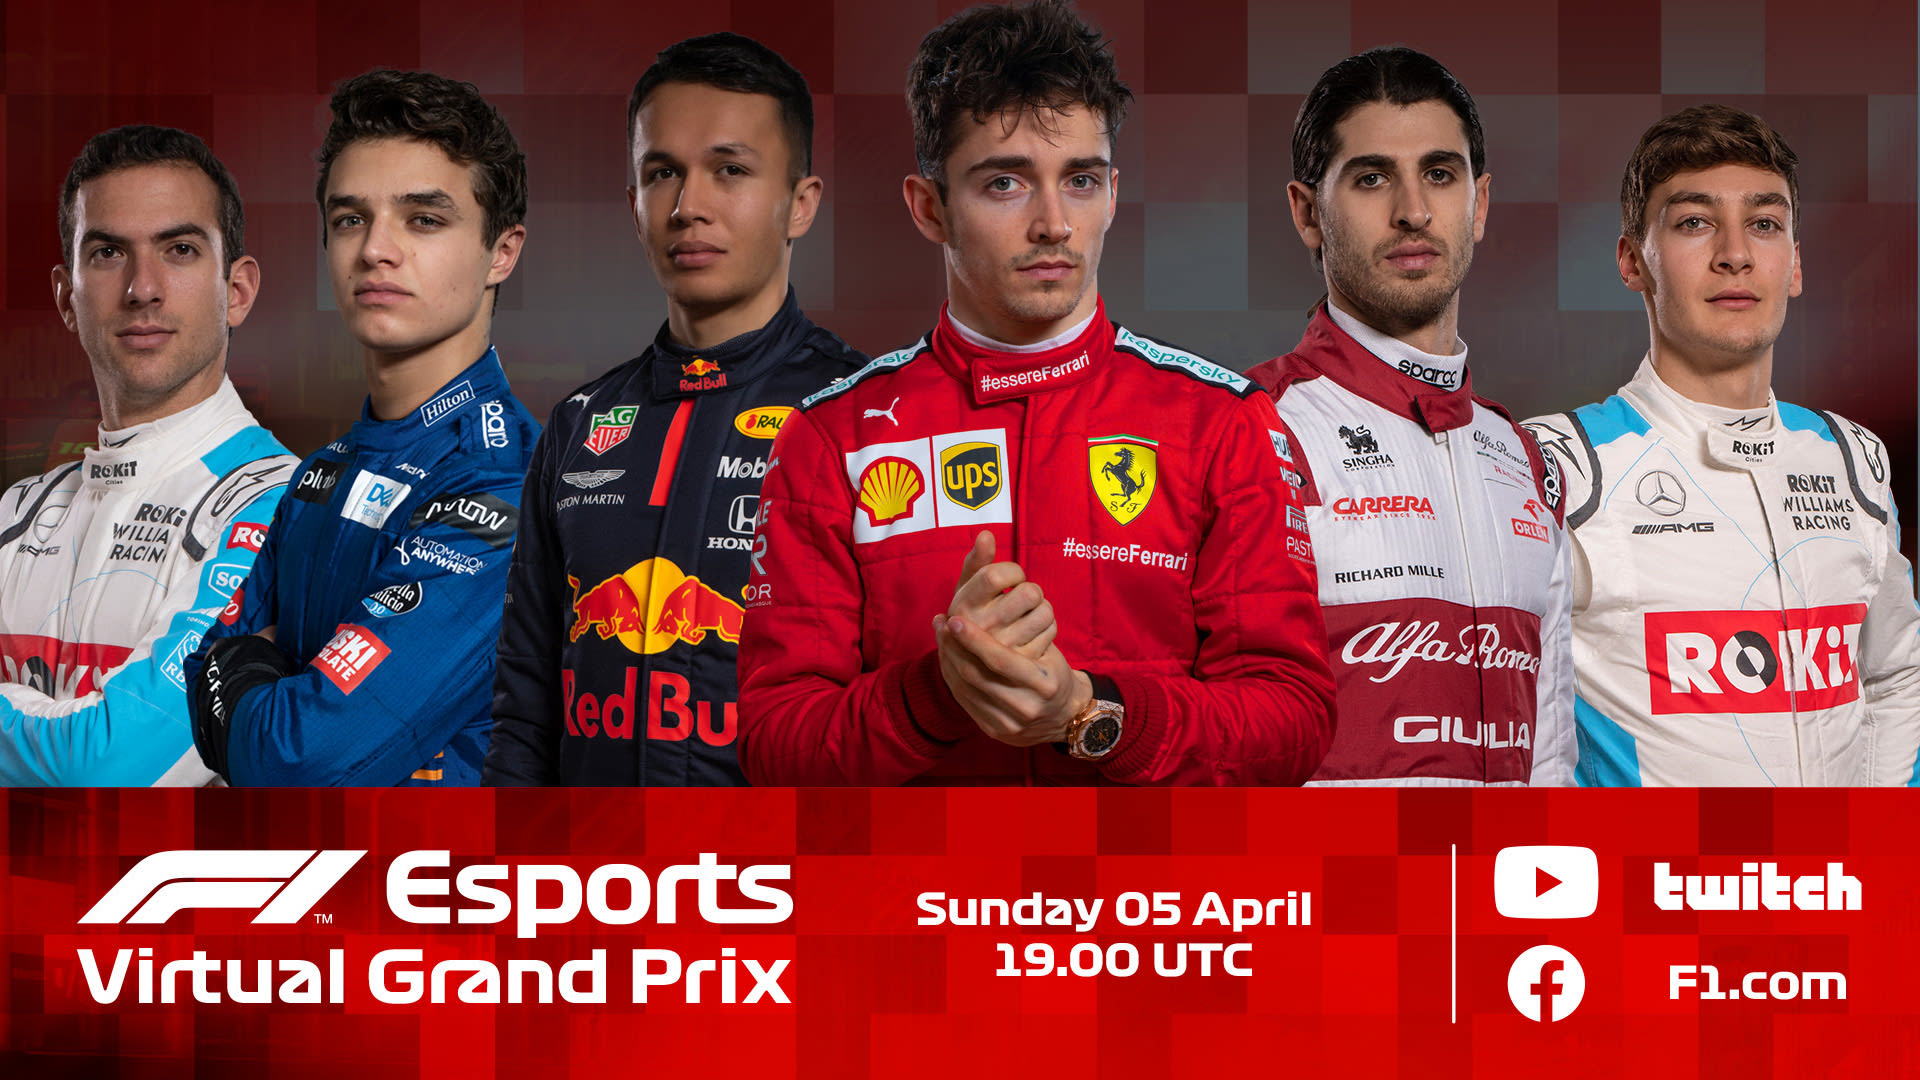 WATCH LIVE Leclerc, Norris, Russell and more racing in tonights F1 Esports Virtual Grand Prix Formula 1®